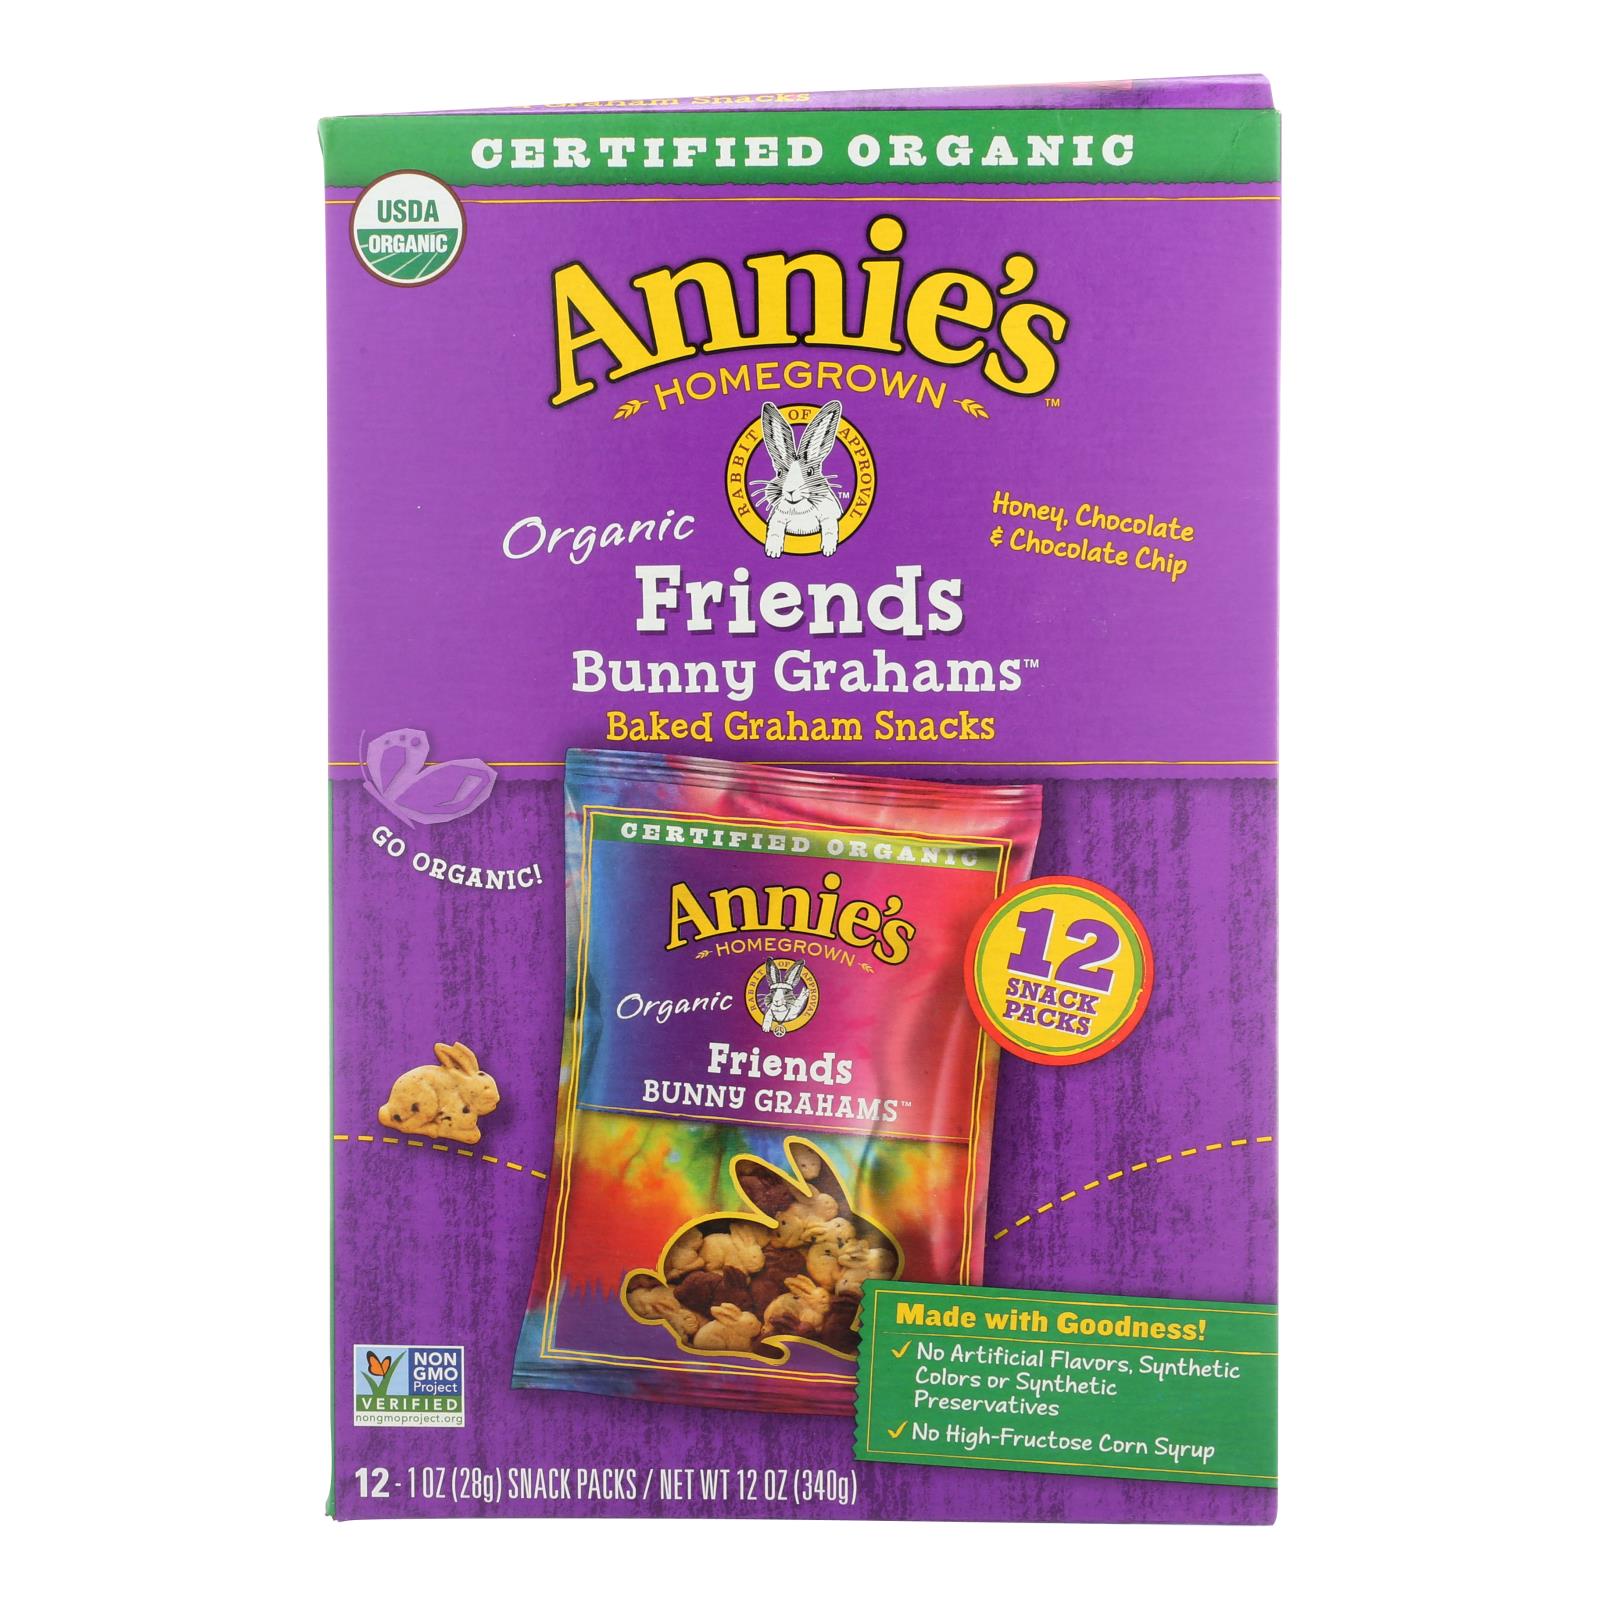 Annie'S Homegrown, Annie's Homegrown Snack Pack - Organic - Bunny Grahms - Frd - 12 - Case of 4 - 12/1 oz (Pack of 4)